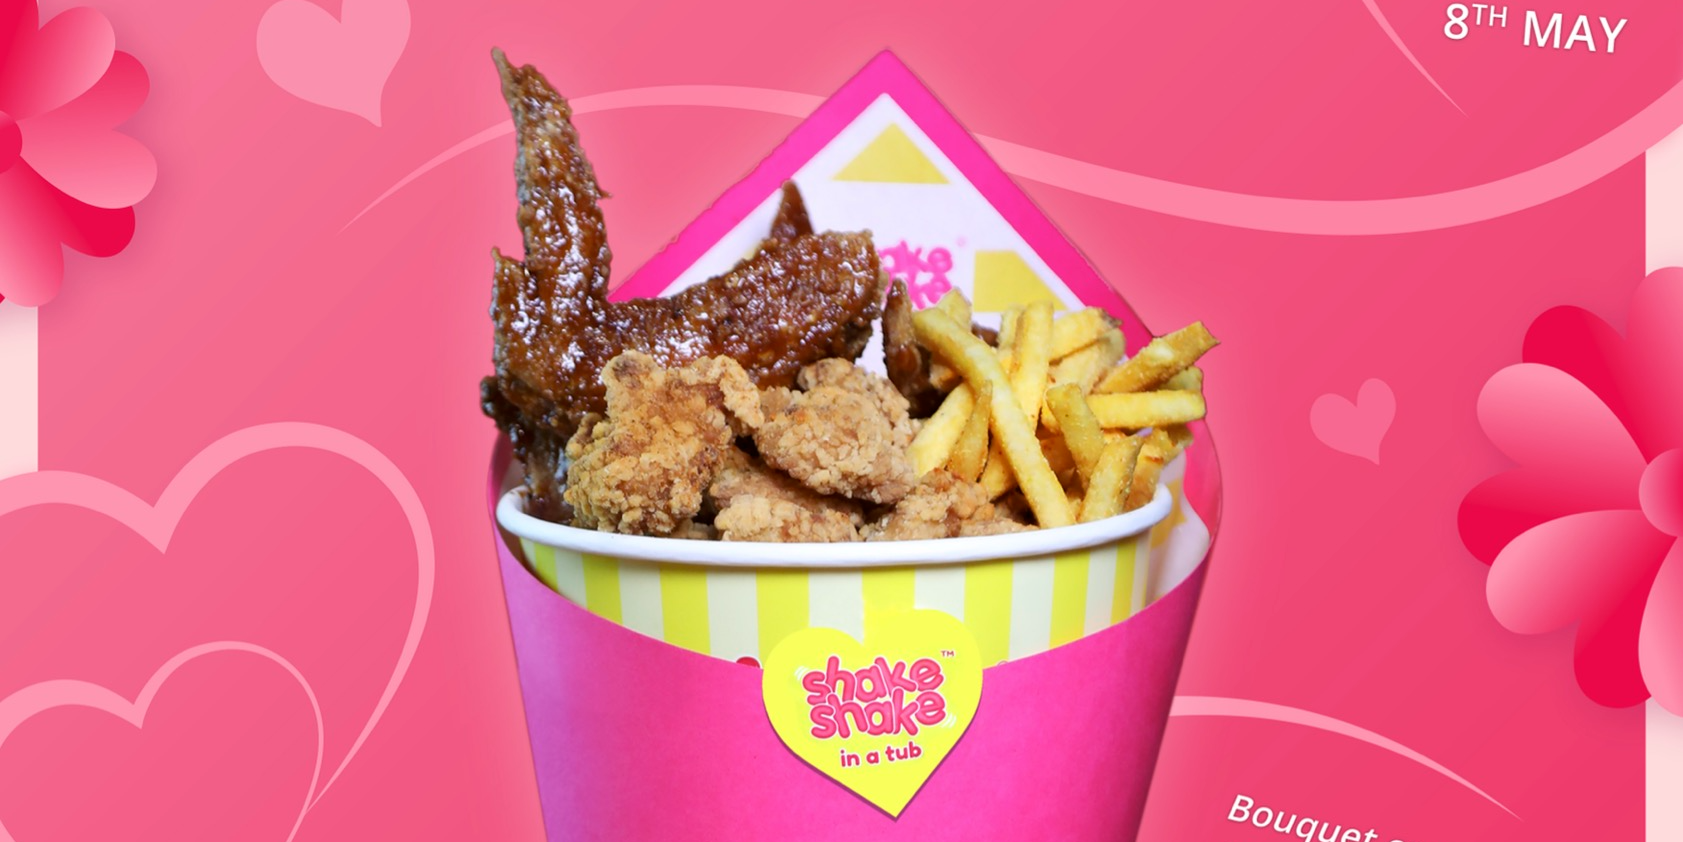 Sold-Out Shake Shake In A Tub Fried Chicken Bouquet Is Back This Mother’s Day For $19.90!